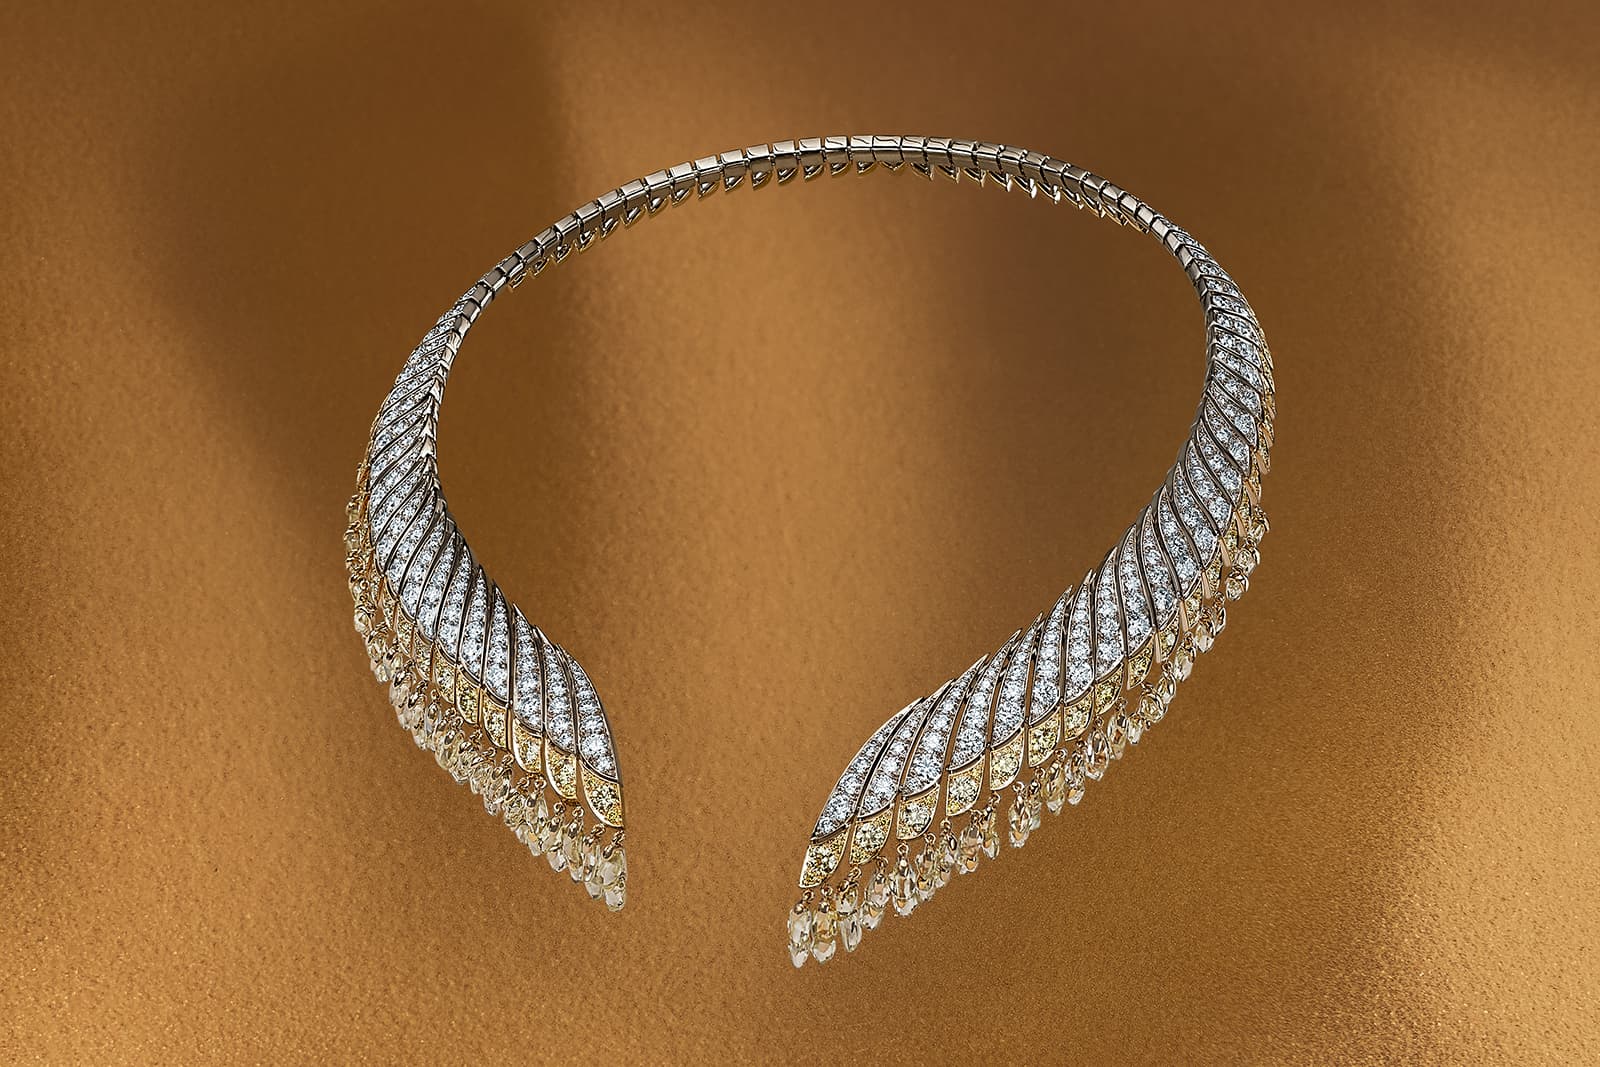 De Beers Reflections of Nature Namib Wonder necklace with a fringe of rough yellow diamonds